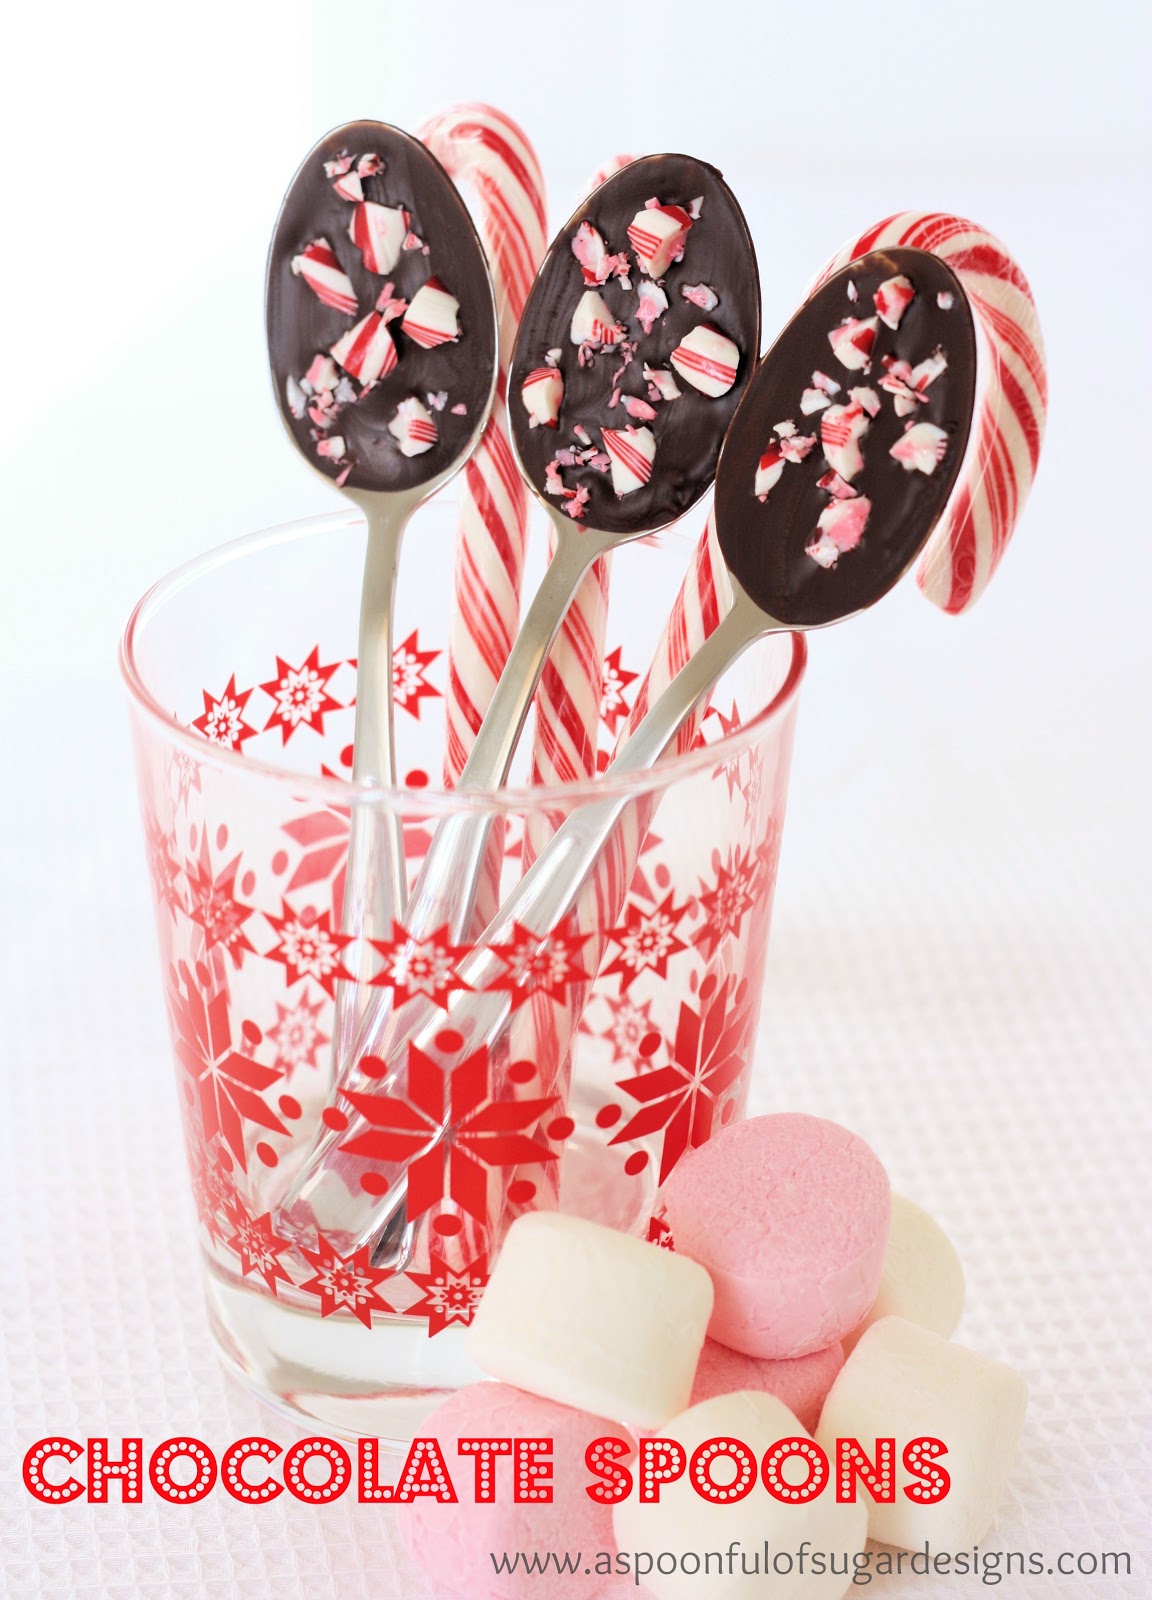 Chocolate Spoons - A Spoonful of Sugar